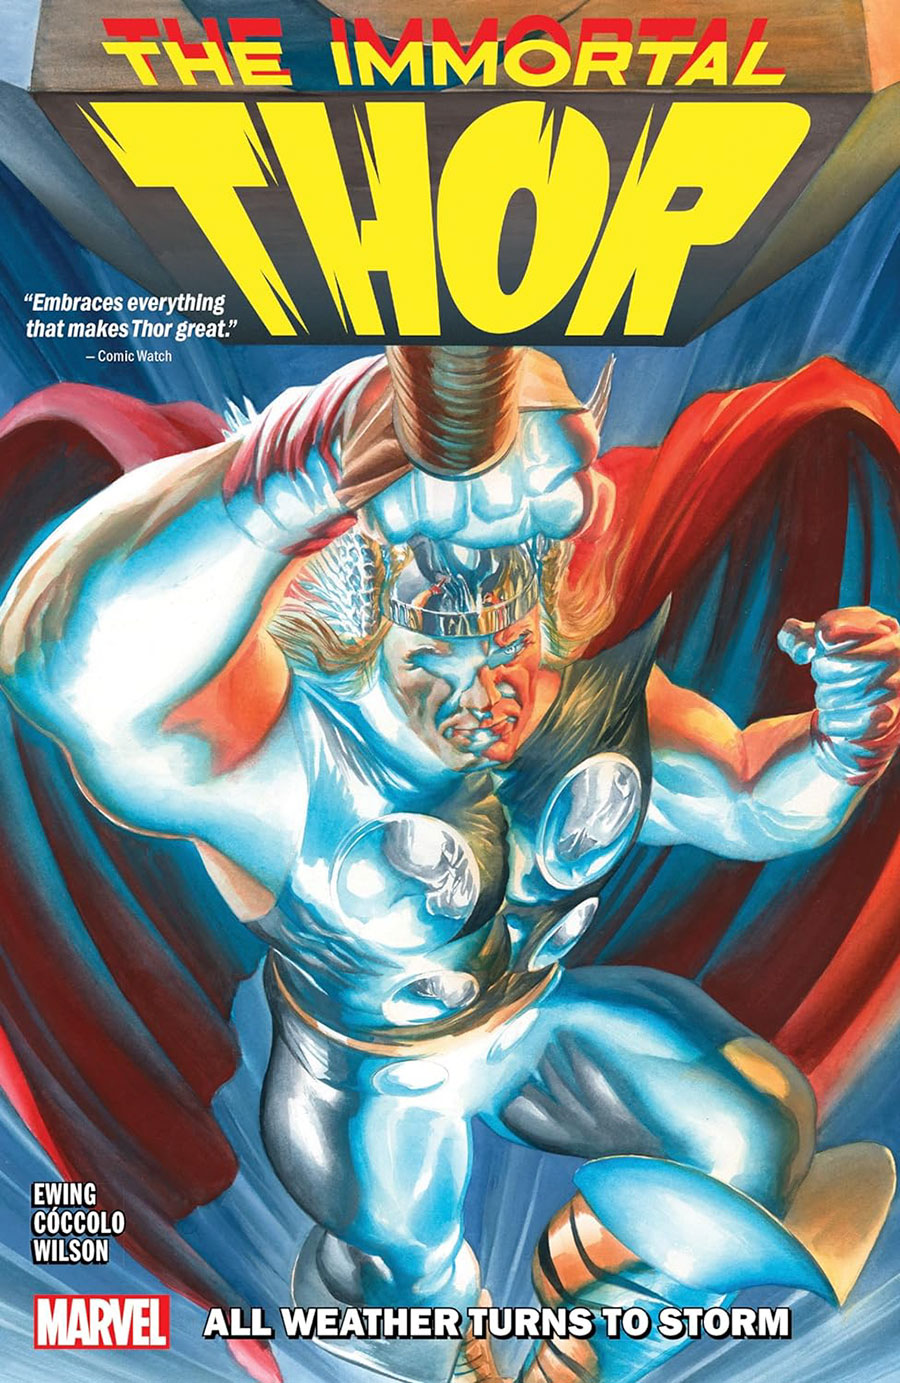 Immortal Thor Vol 1 All Weather Turns To Storm TP